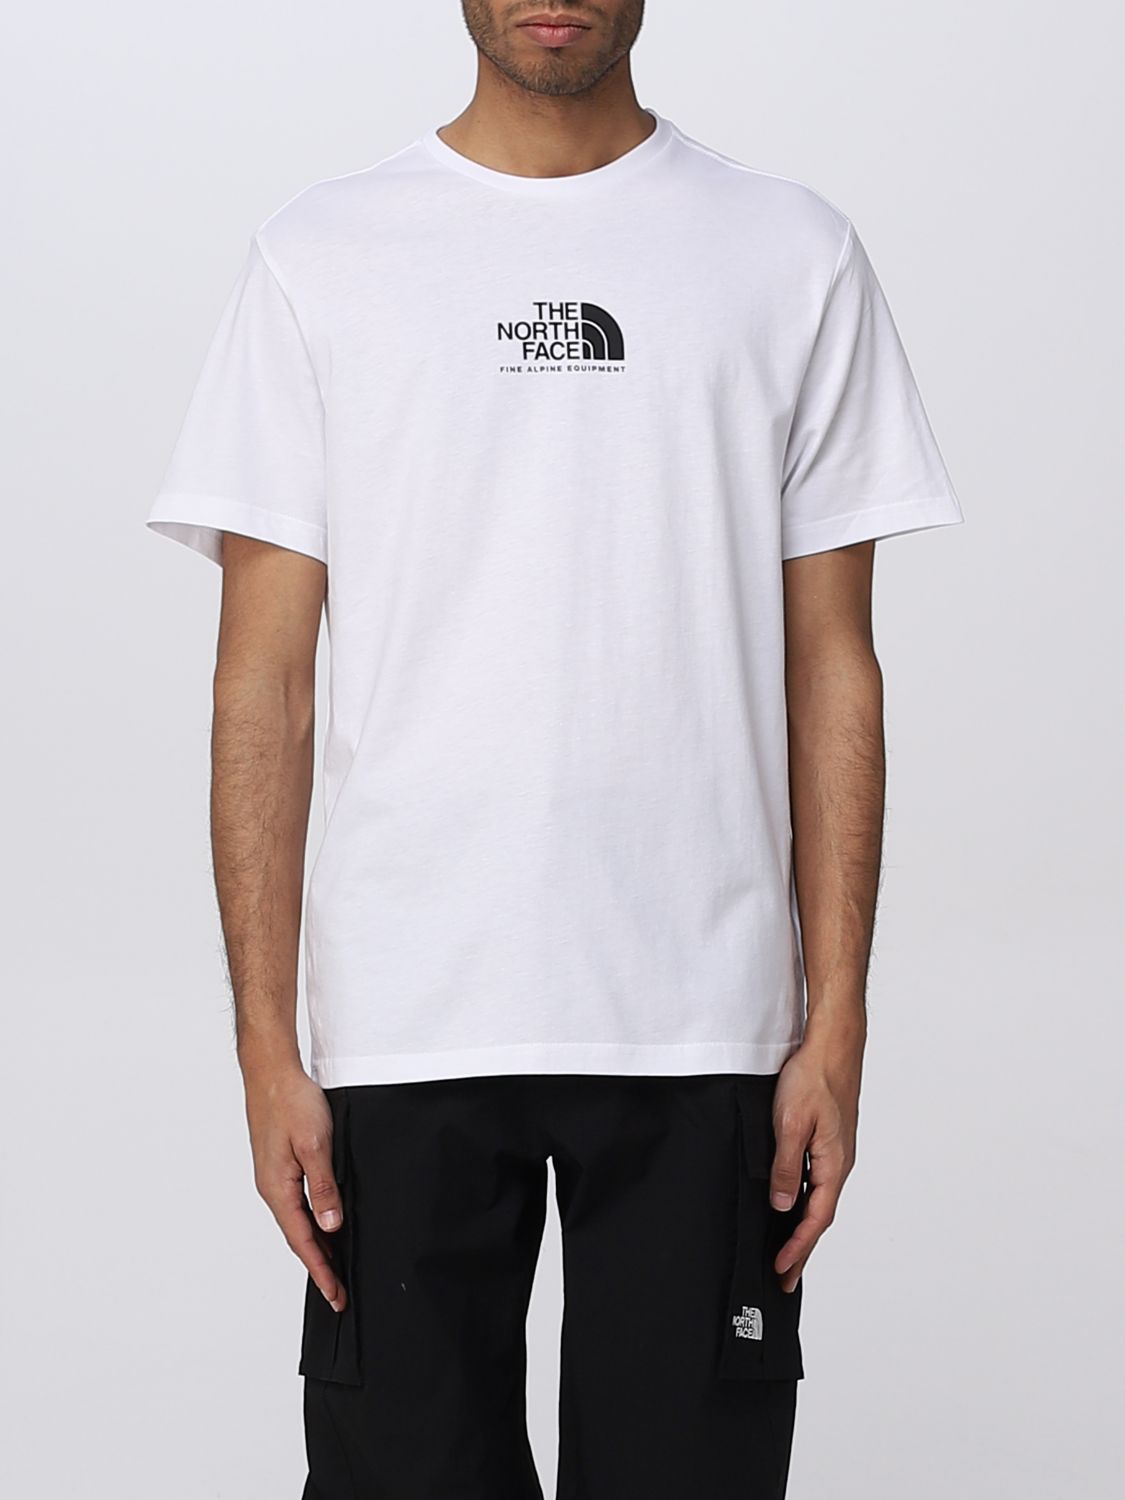 T-Shirt The North Face: The North Face Herren T-Shirt weiß 1